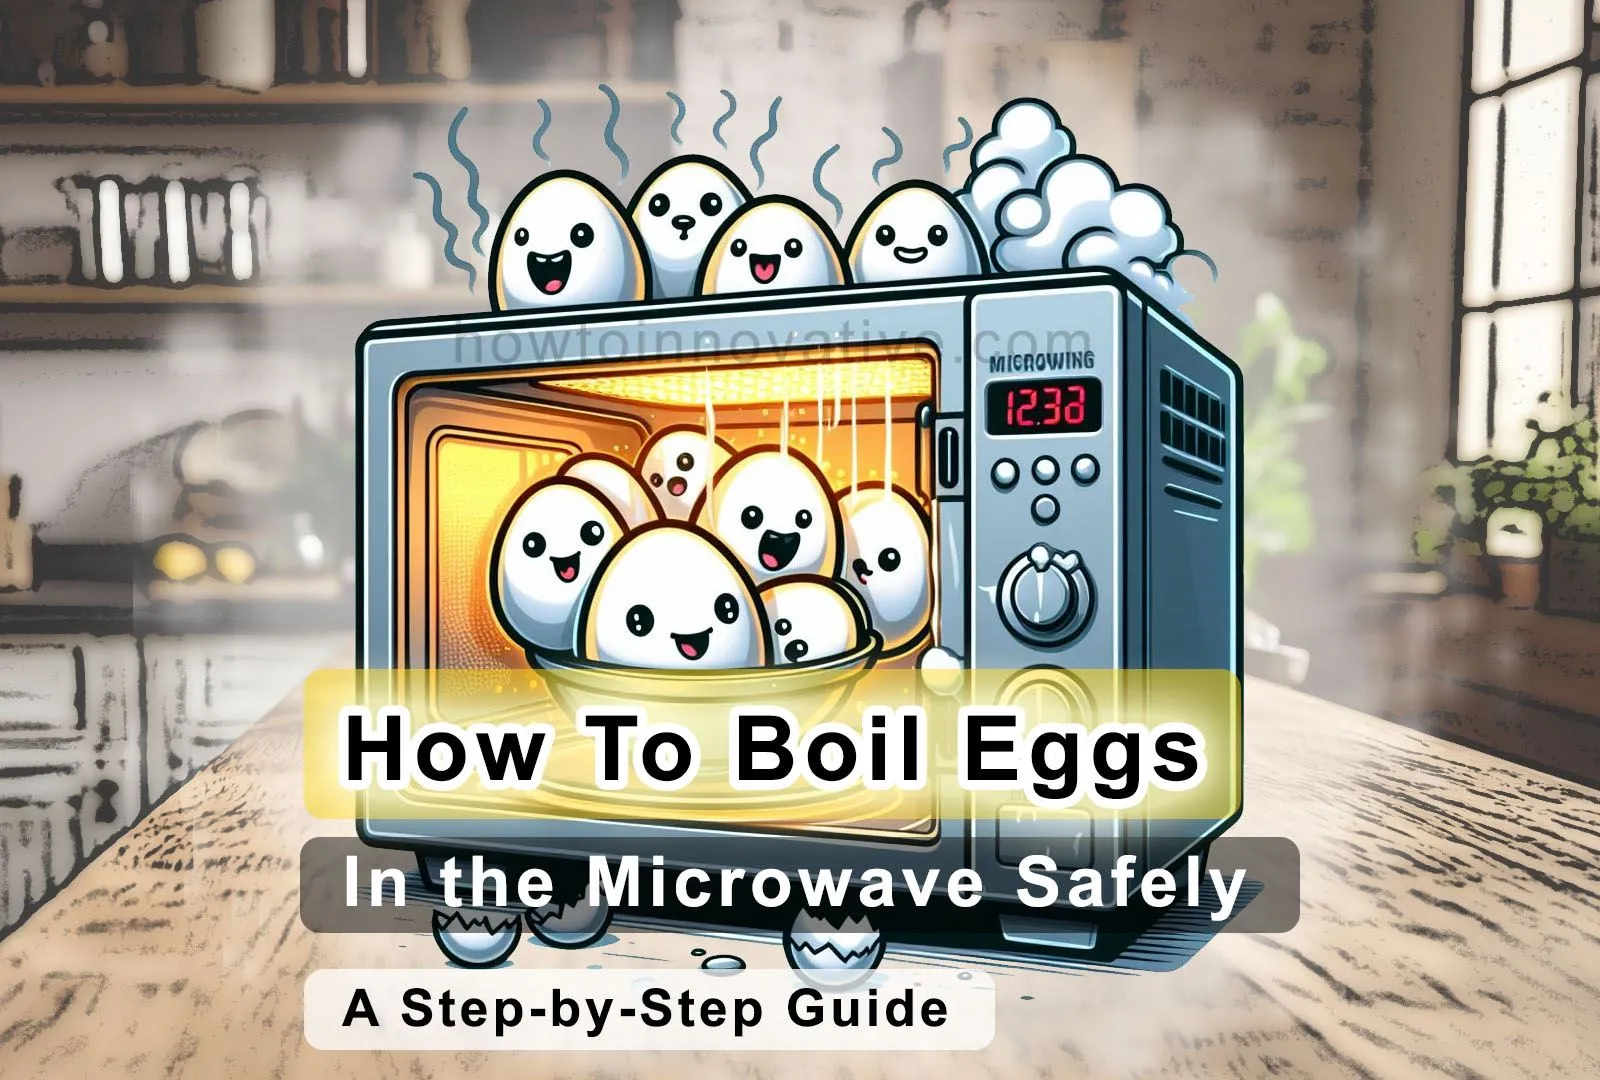 How To Boil Eggs in the Microwave Safely - A Step-by-Step Guide